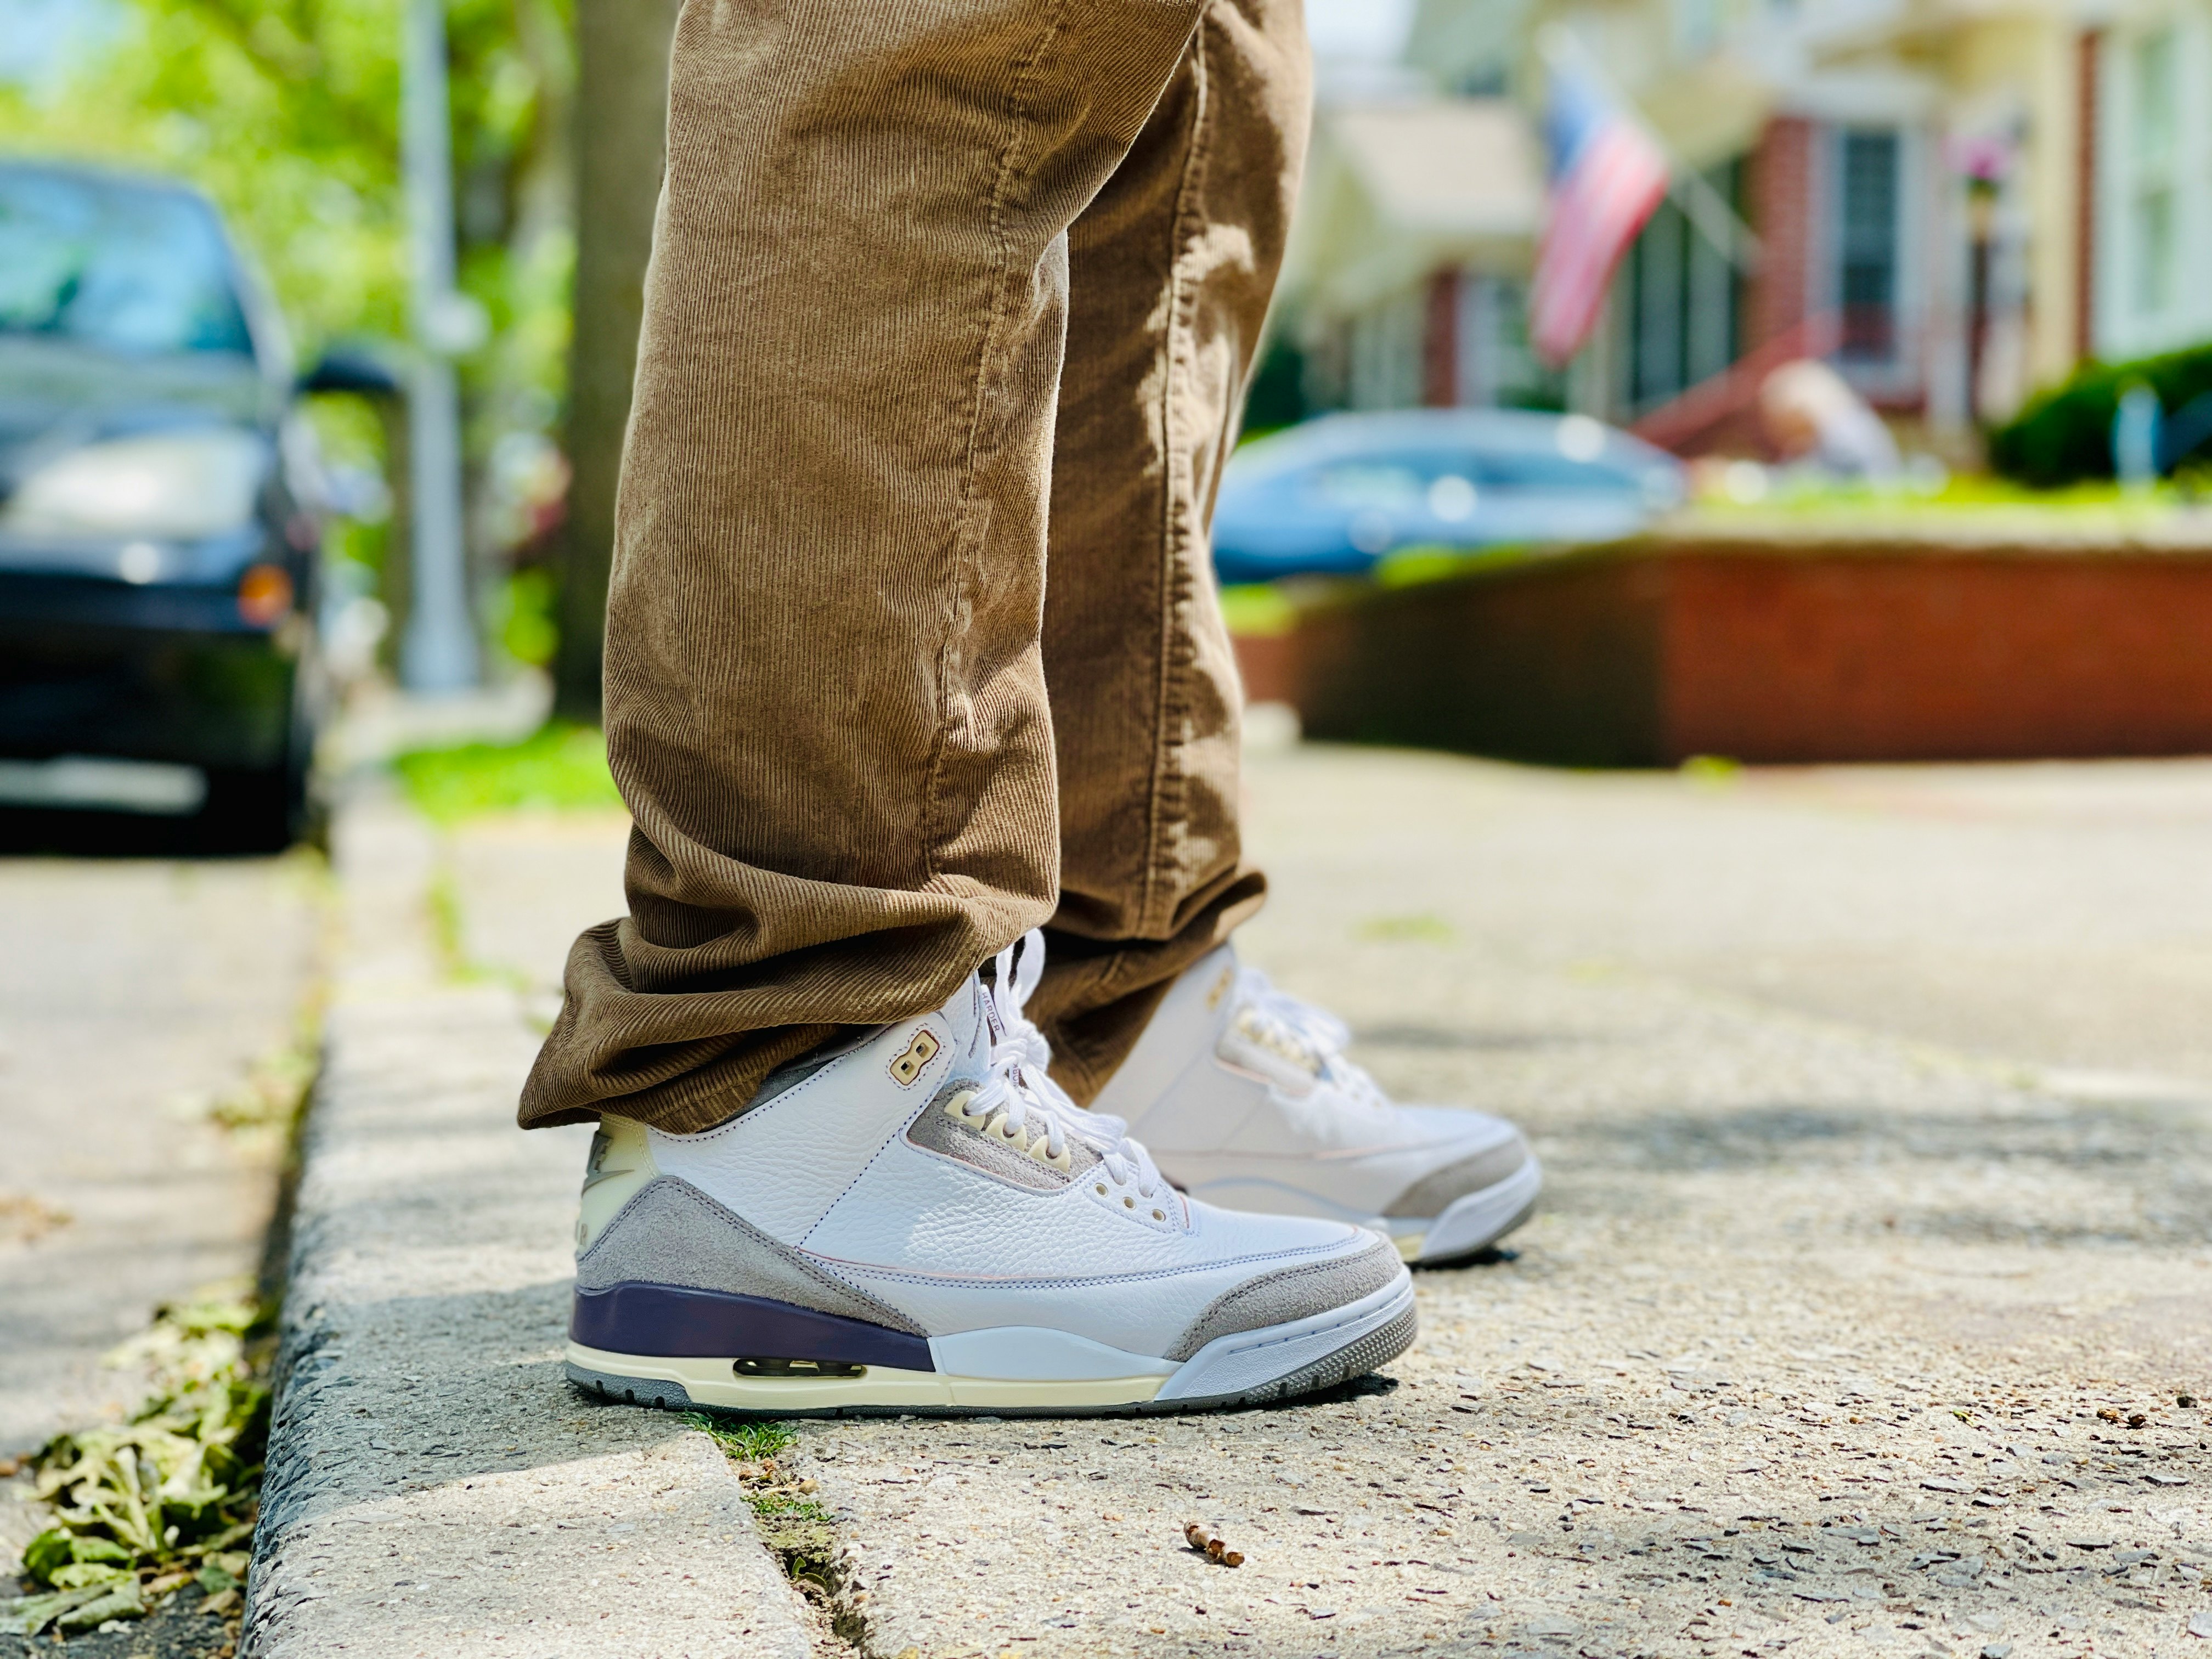 Wearing Nike's Jordan 3 'A Ma Maniére': Sneaker of the year?